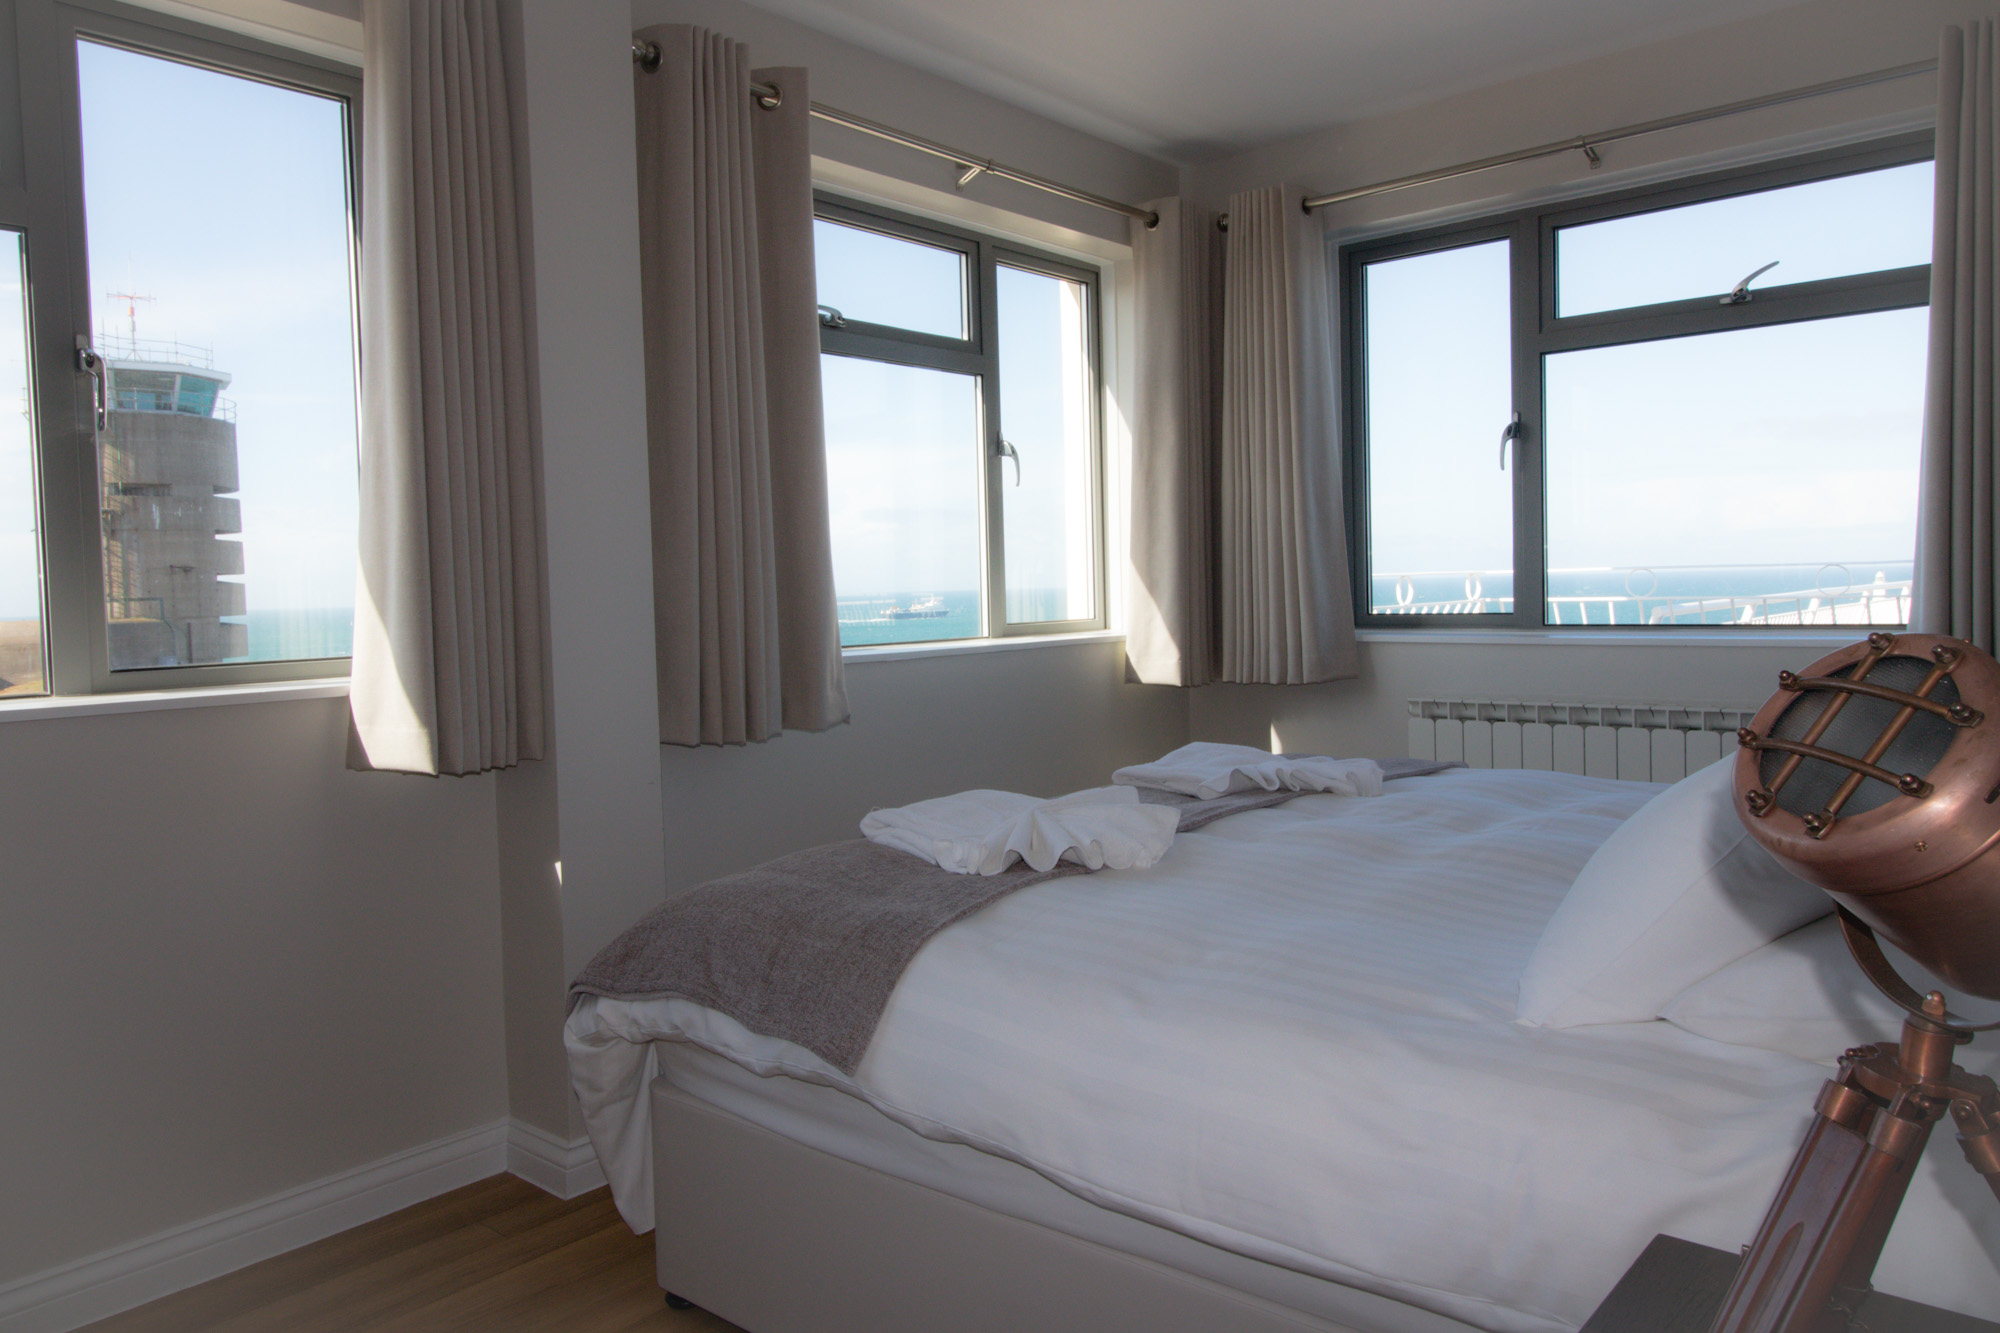 Apartment 1 Bedroom with panoramic views over Radio Tower and Corbiere Lighthouse